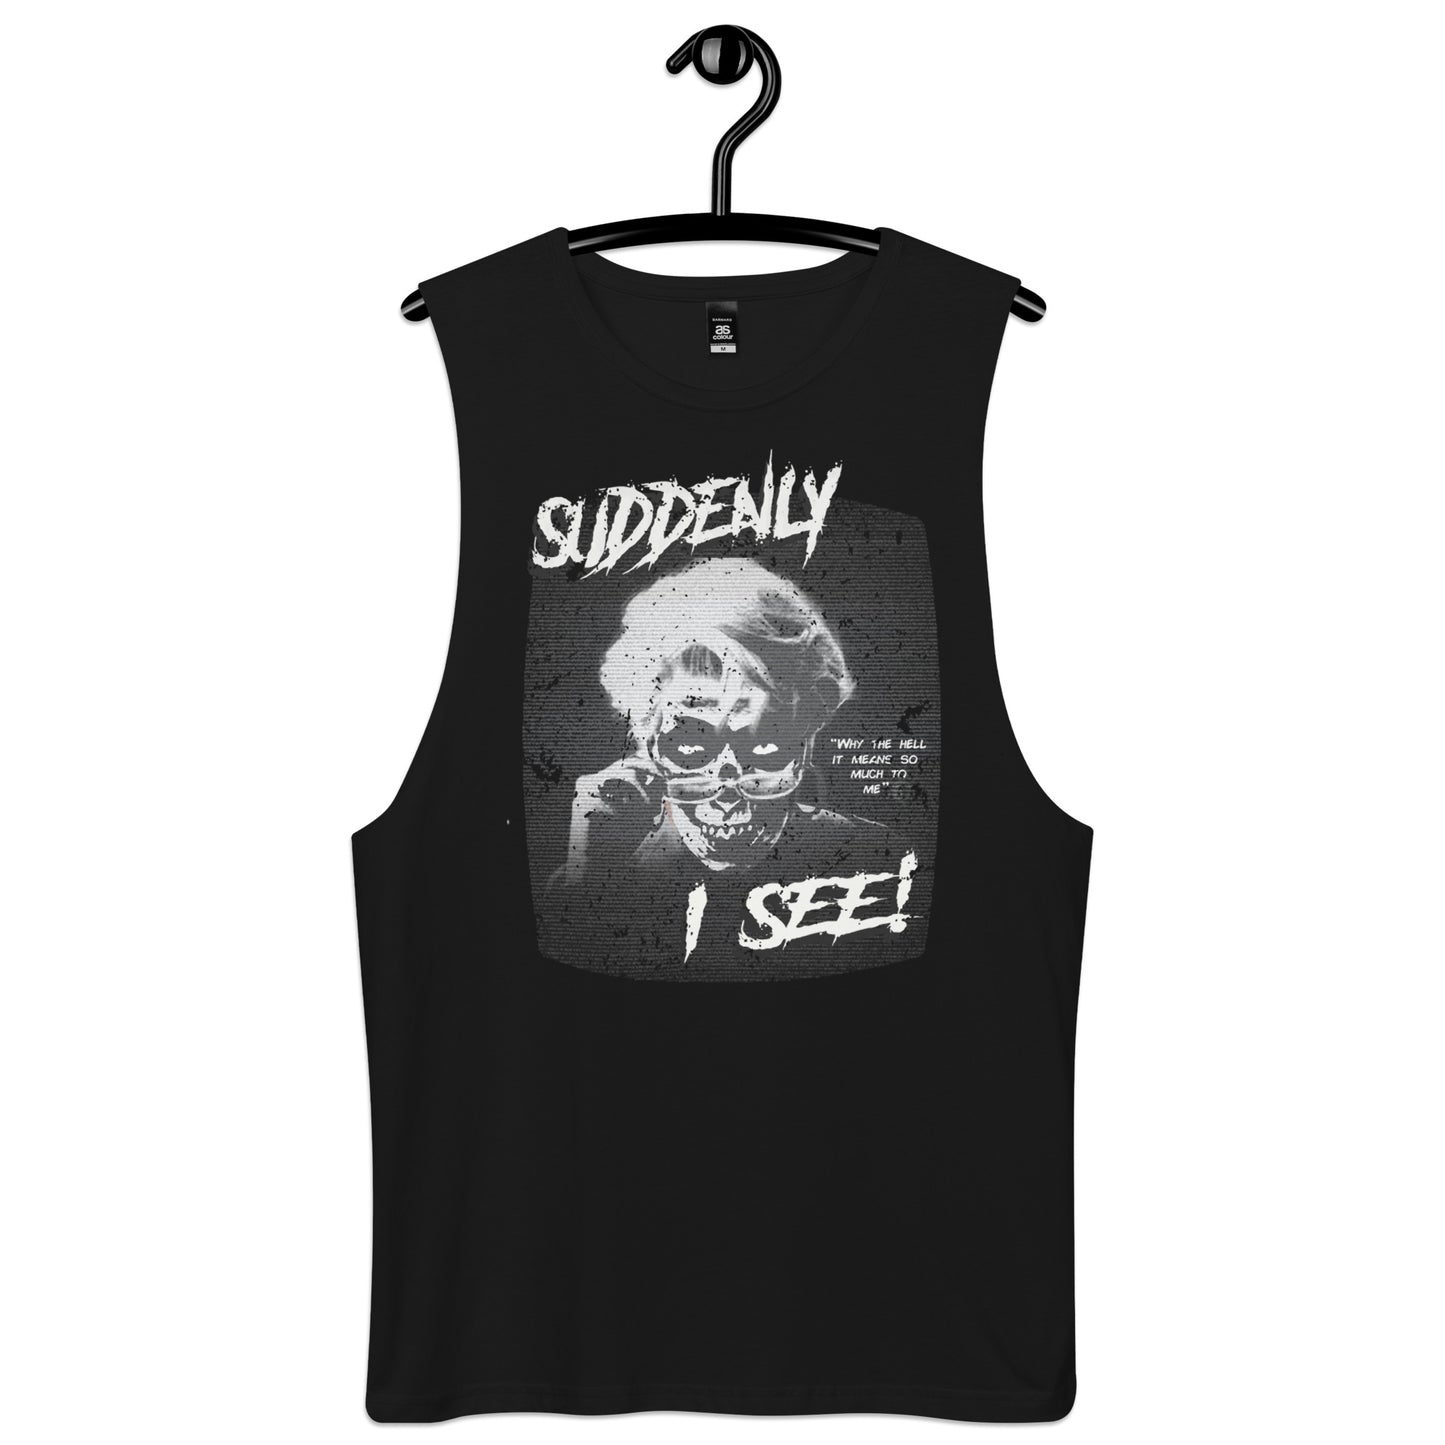 Suddenly I See Skelly Tour Dates Tank | Black